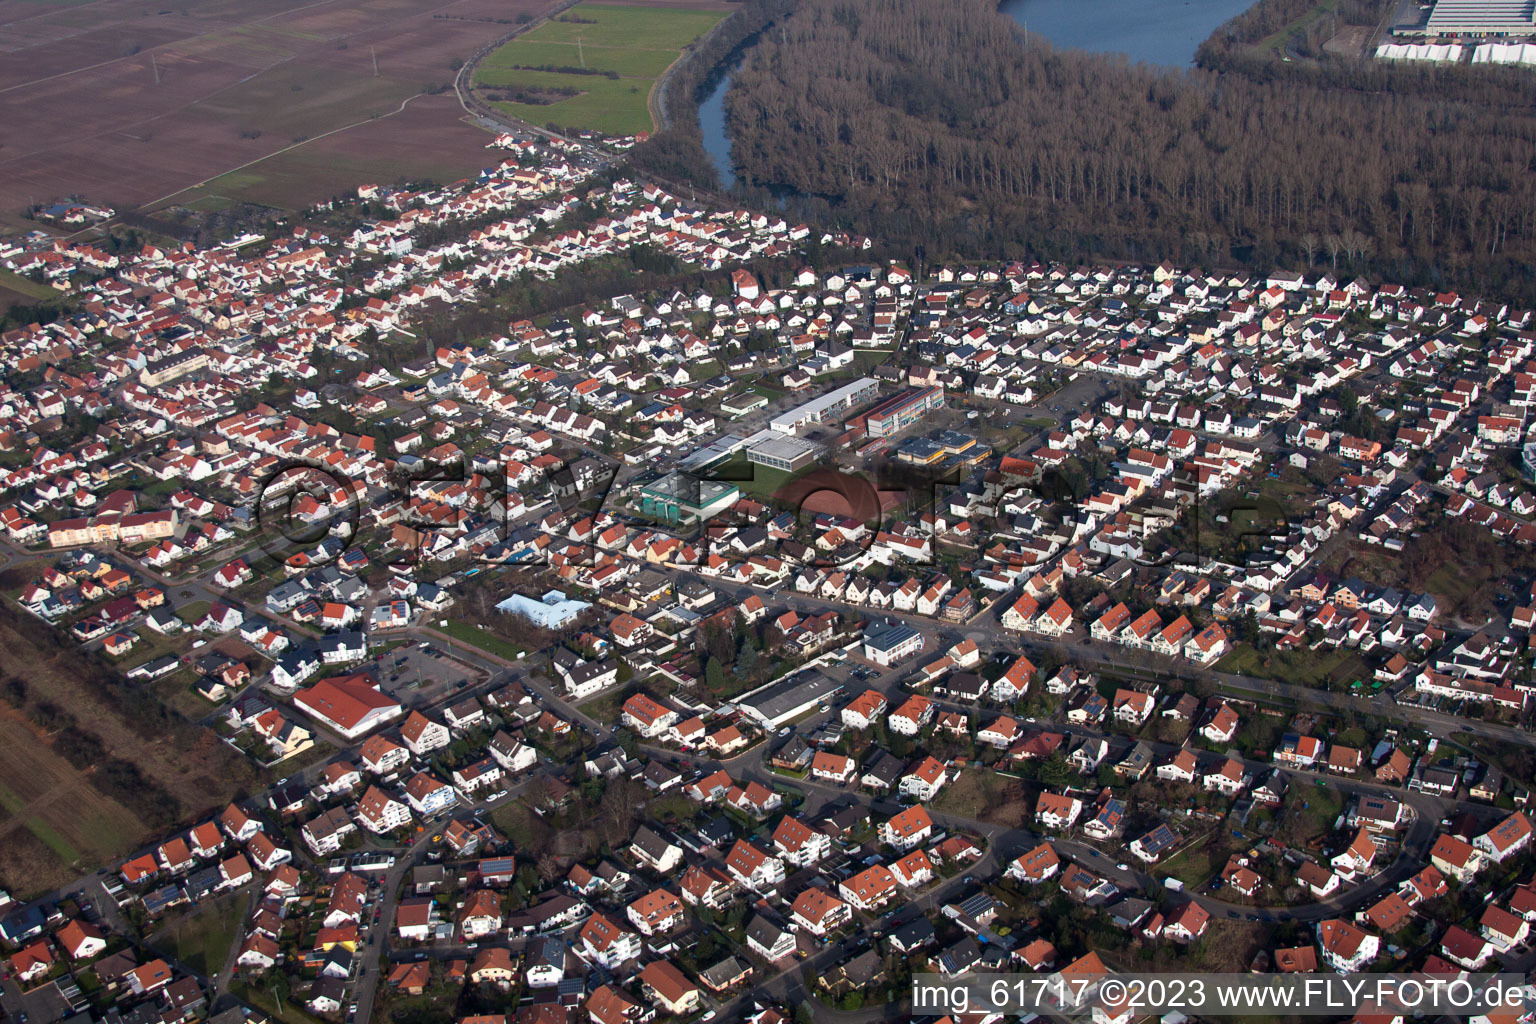 Lingenfeld in the state Rhineland-Palatinate, Germany seen from a drone